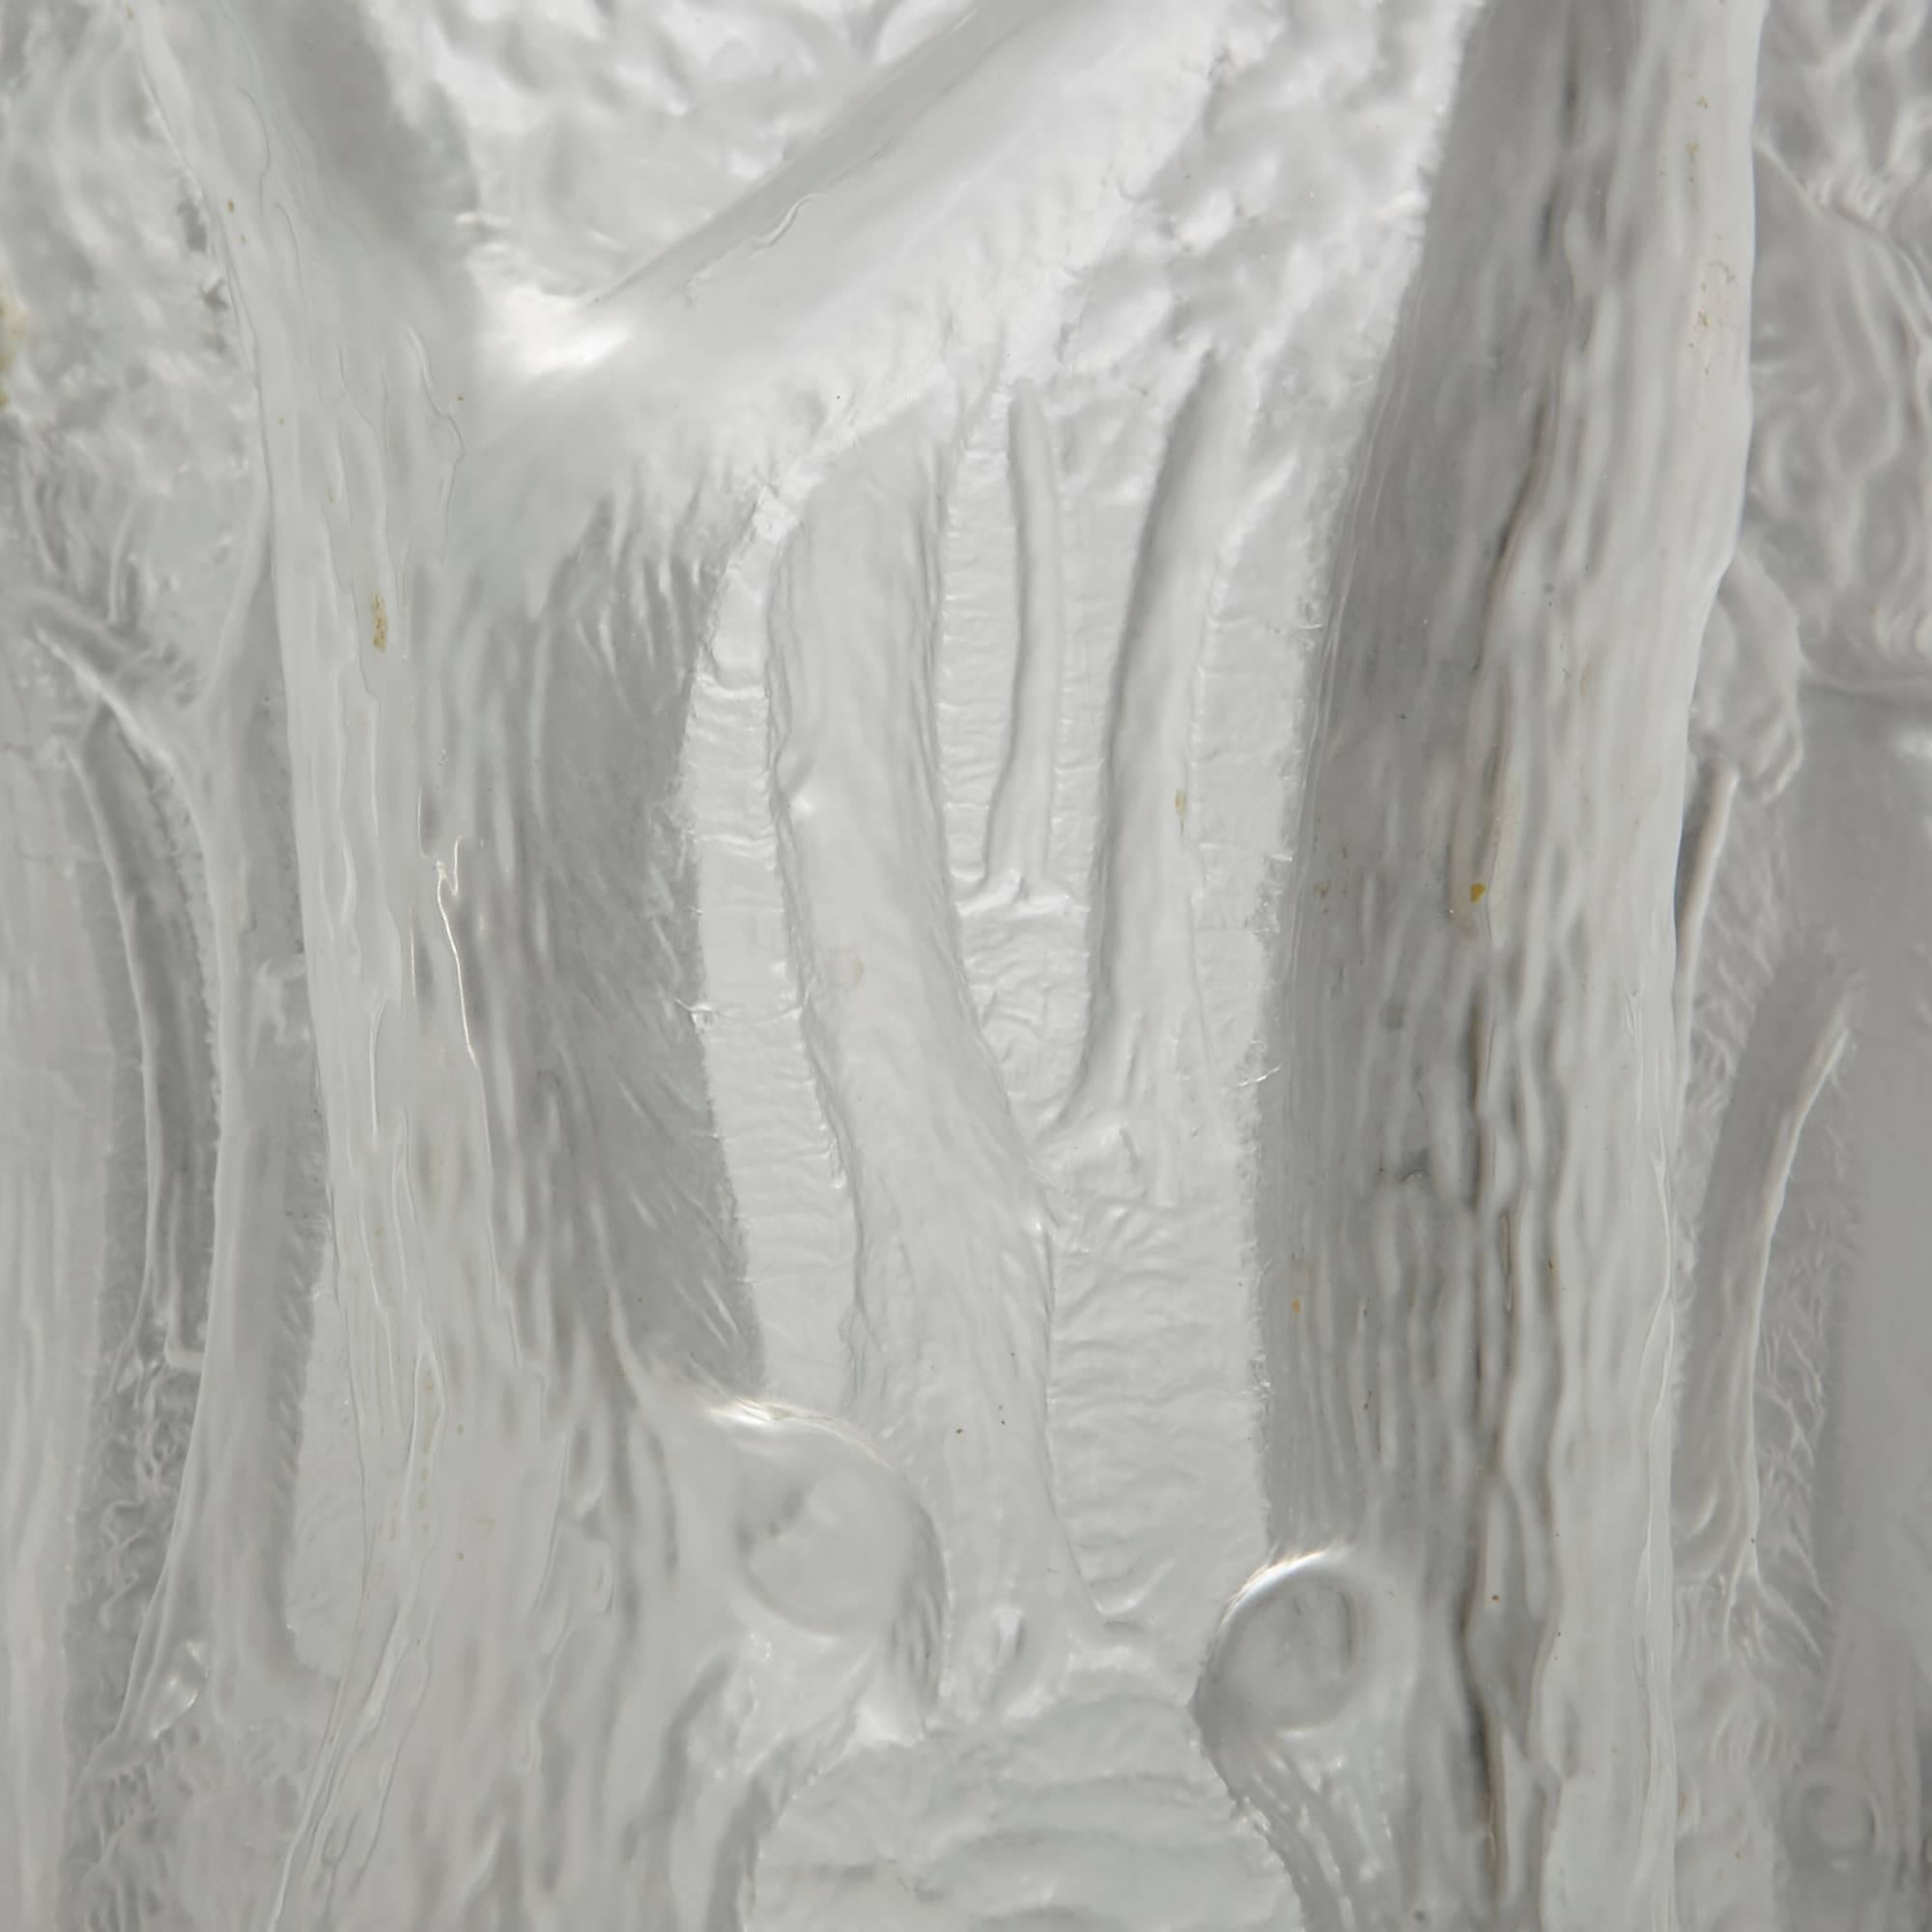 Mid-20th Century Czechoslovakian Josef Inwald Barolac Art Deco Frosted Glass Forest Vase For Sale